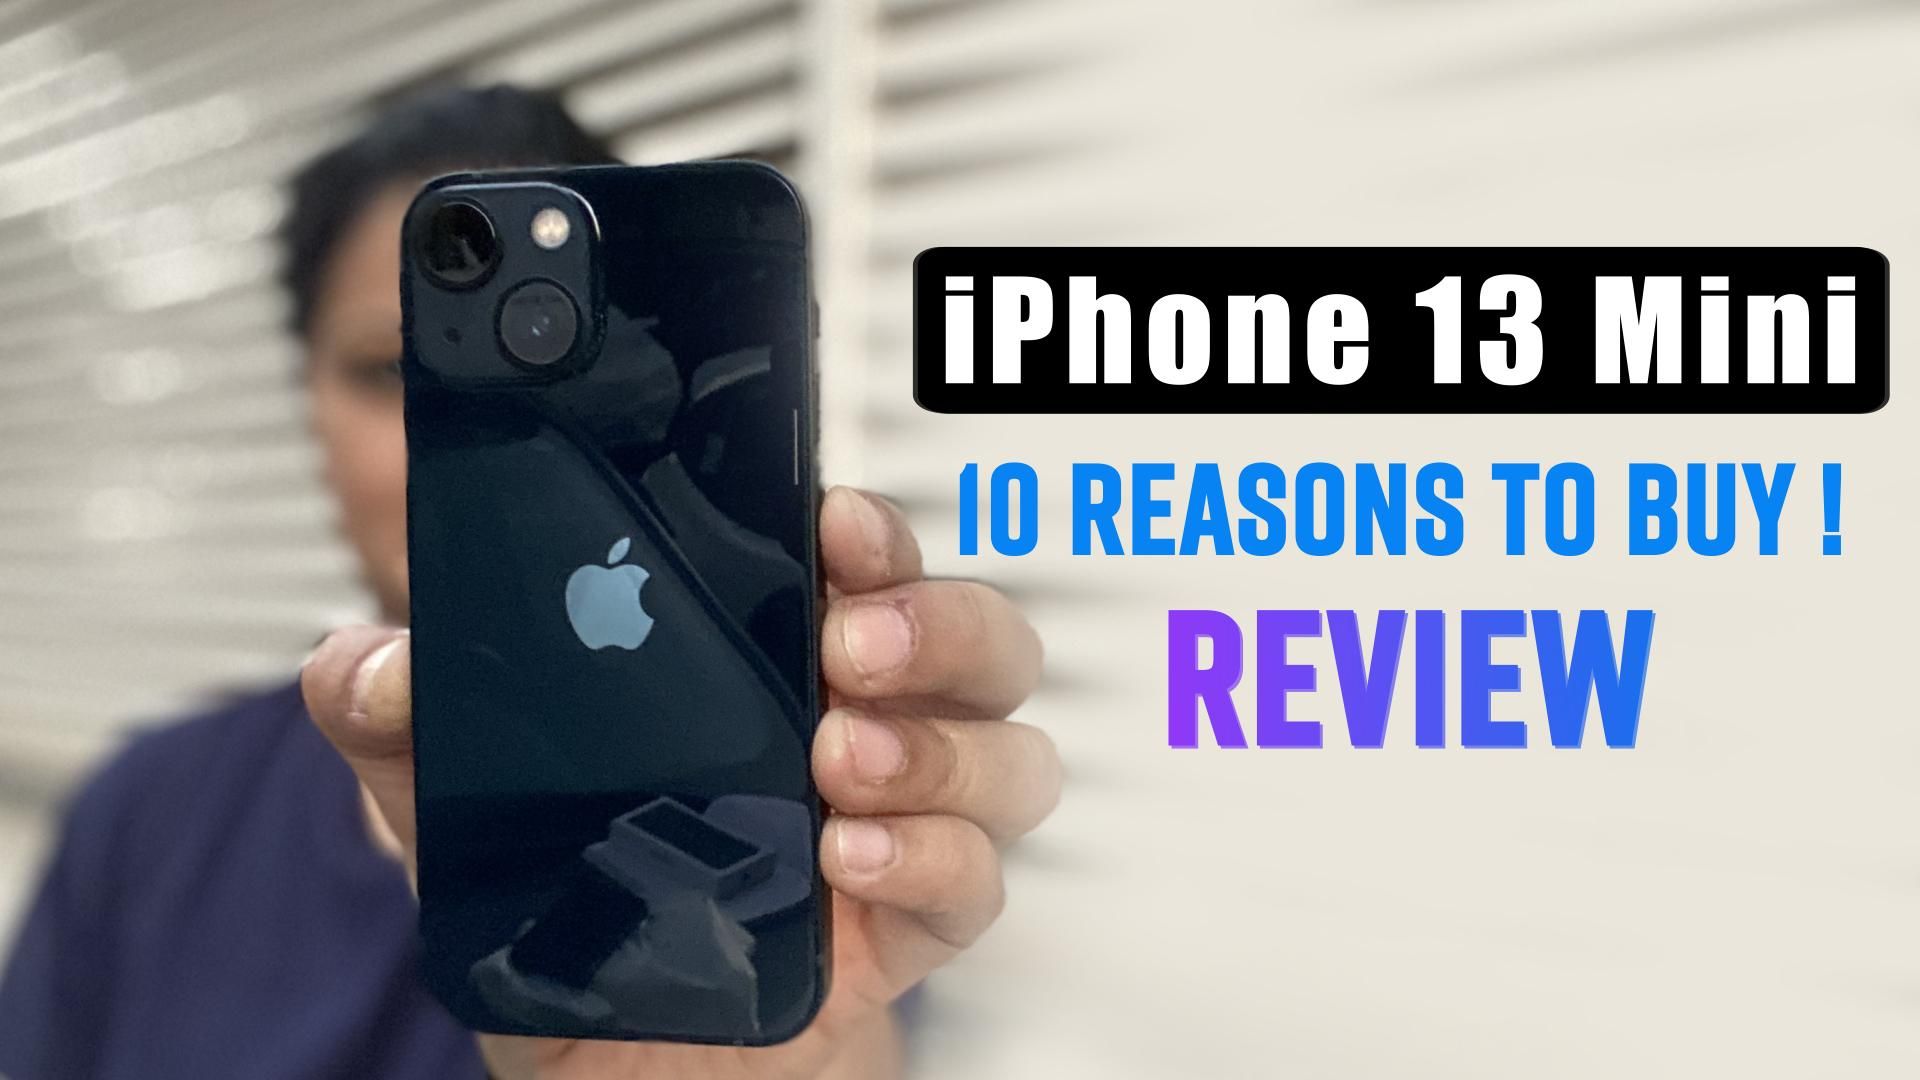 Apple iPhone 13 Mini Review: Is it Best Small Phone Ever Made? Find Out